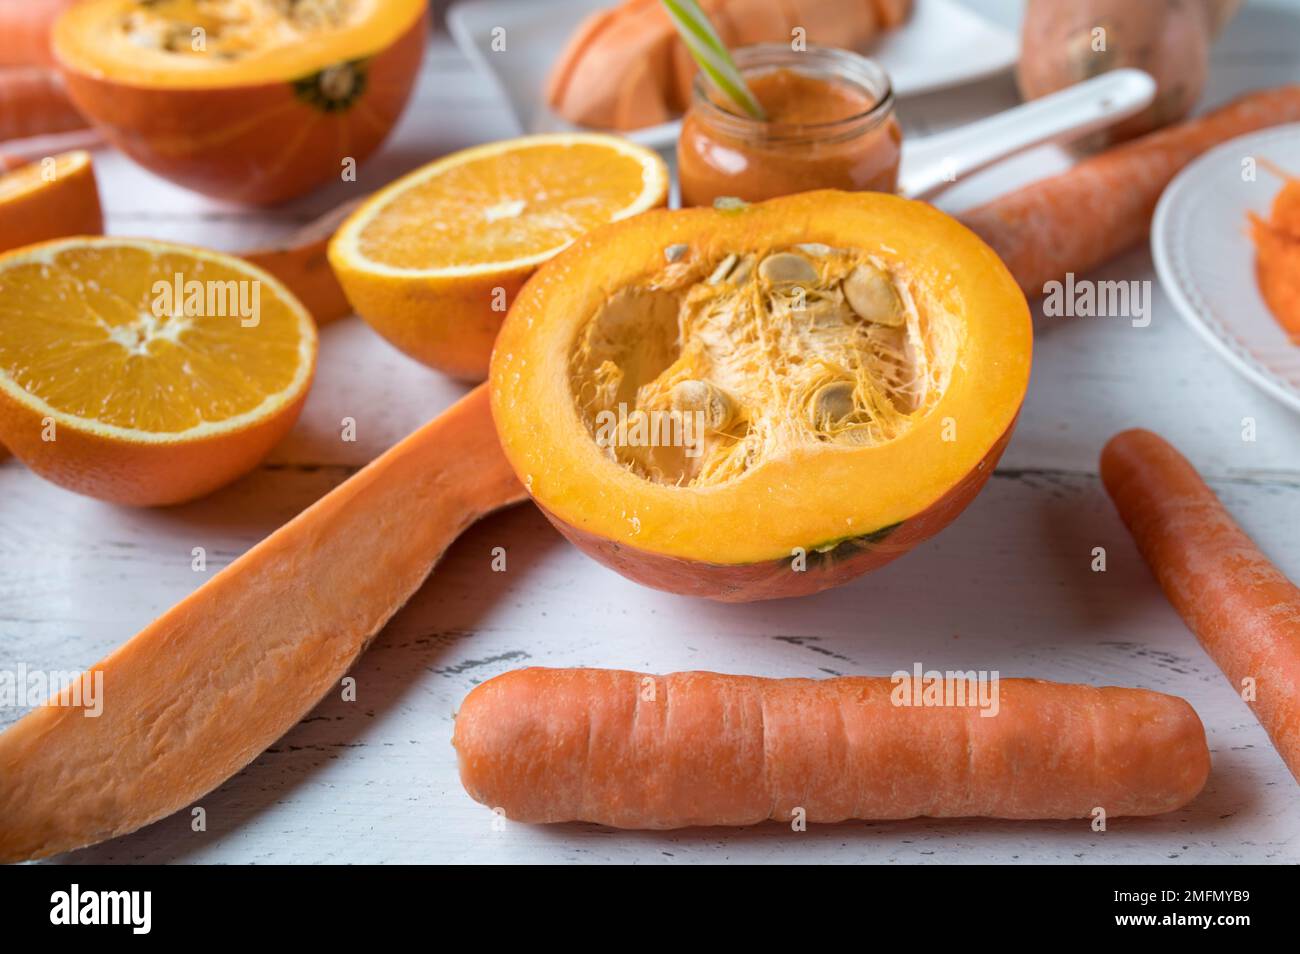 Oranged colored vegetables and fruits with natural beta carotene on a table Stock Photo